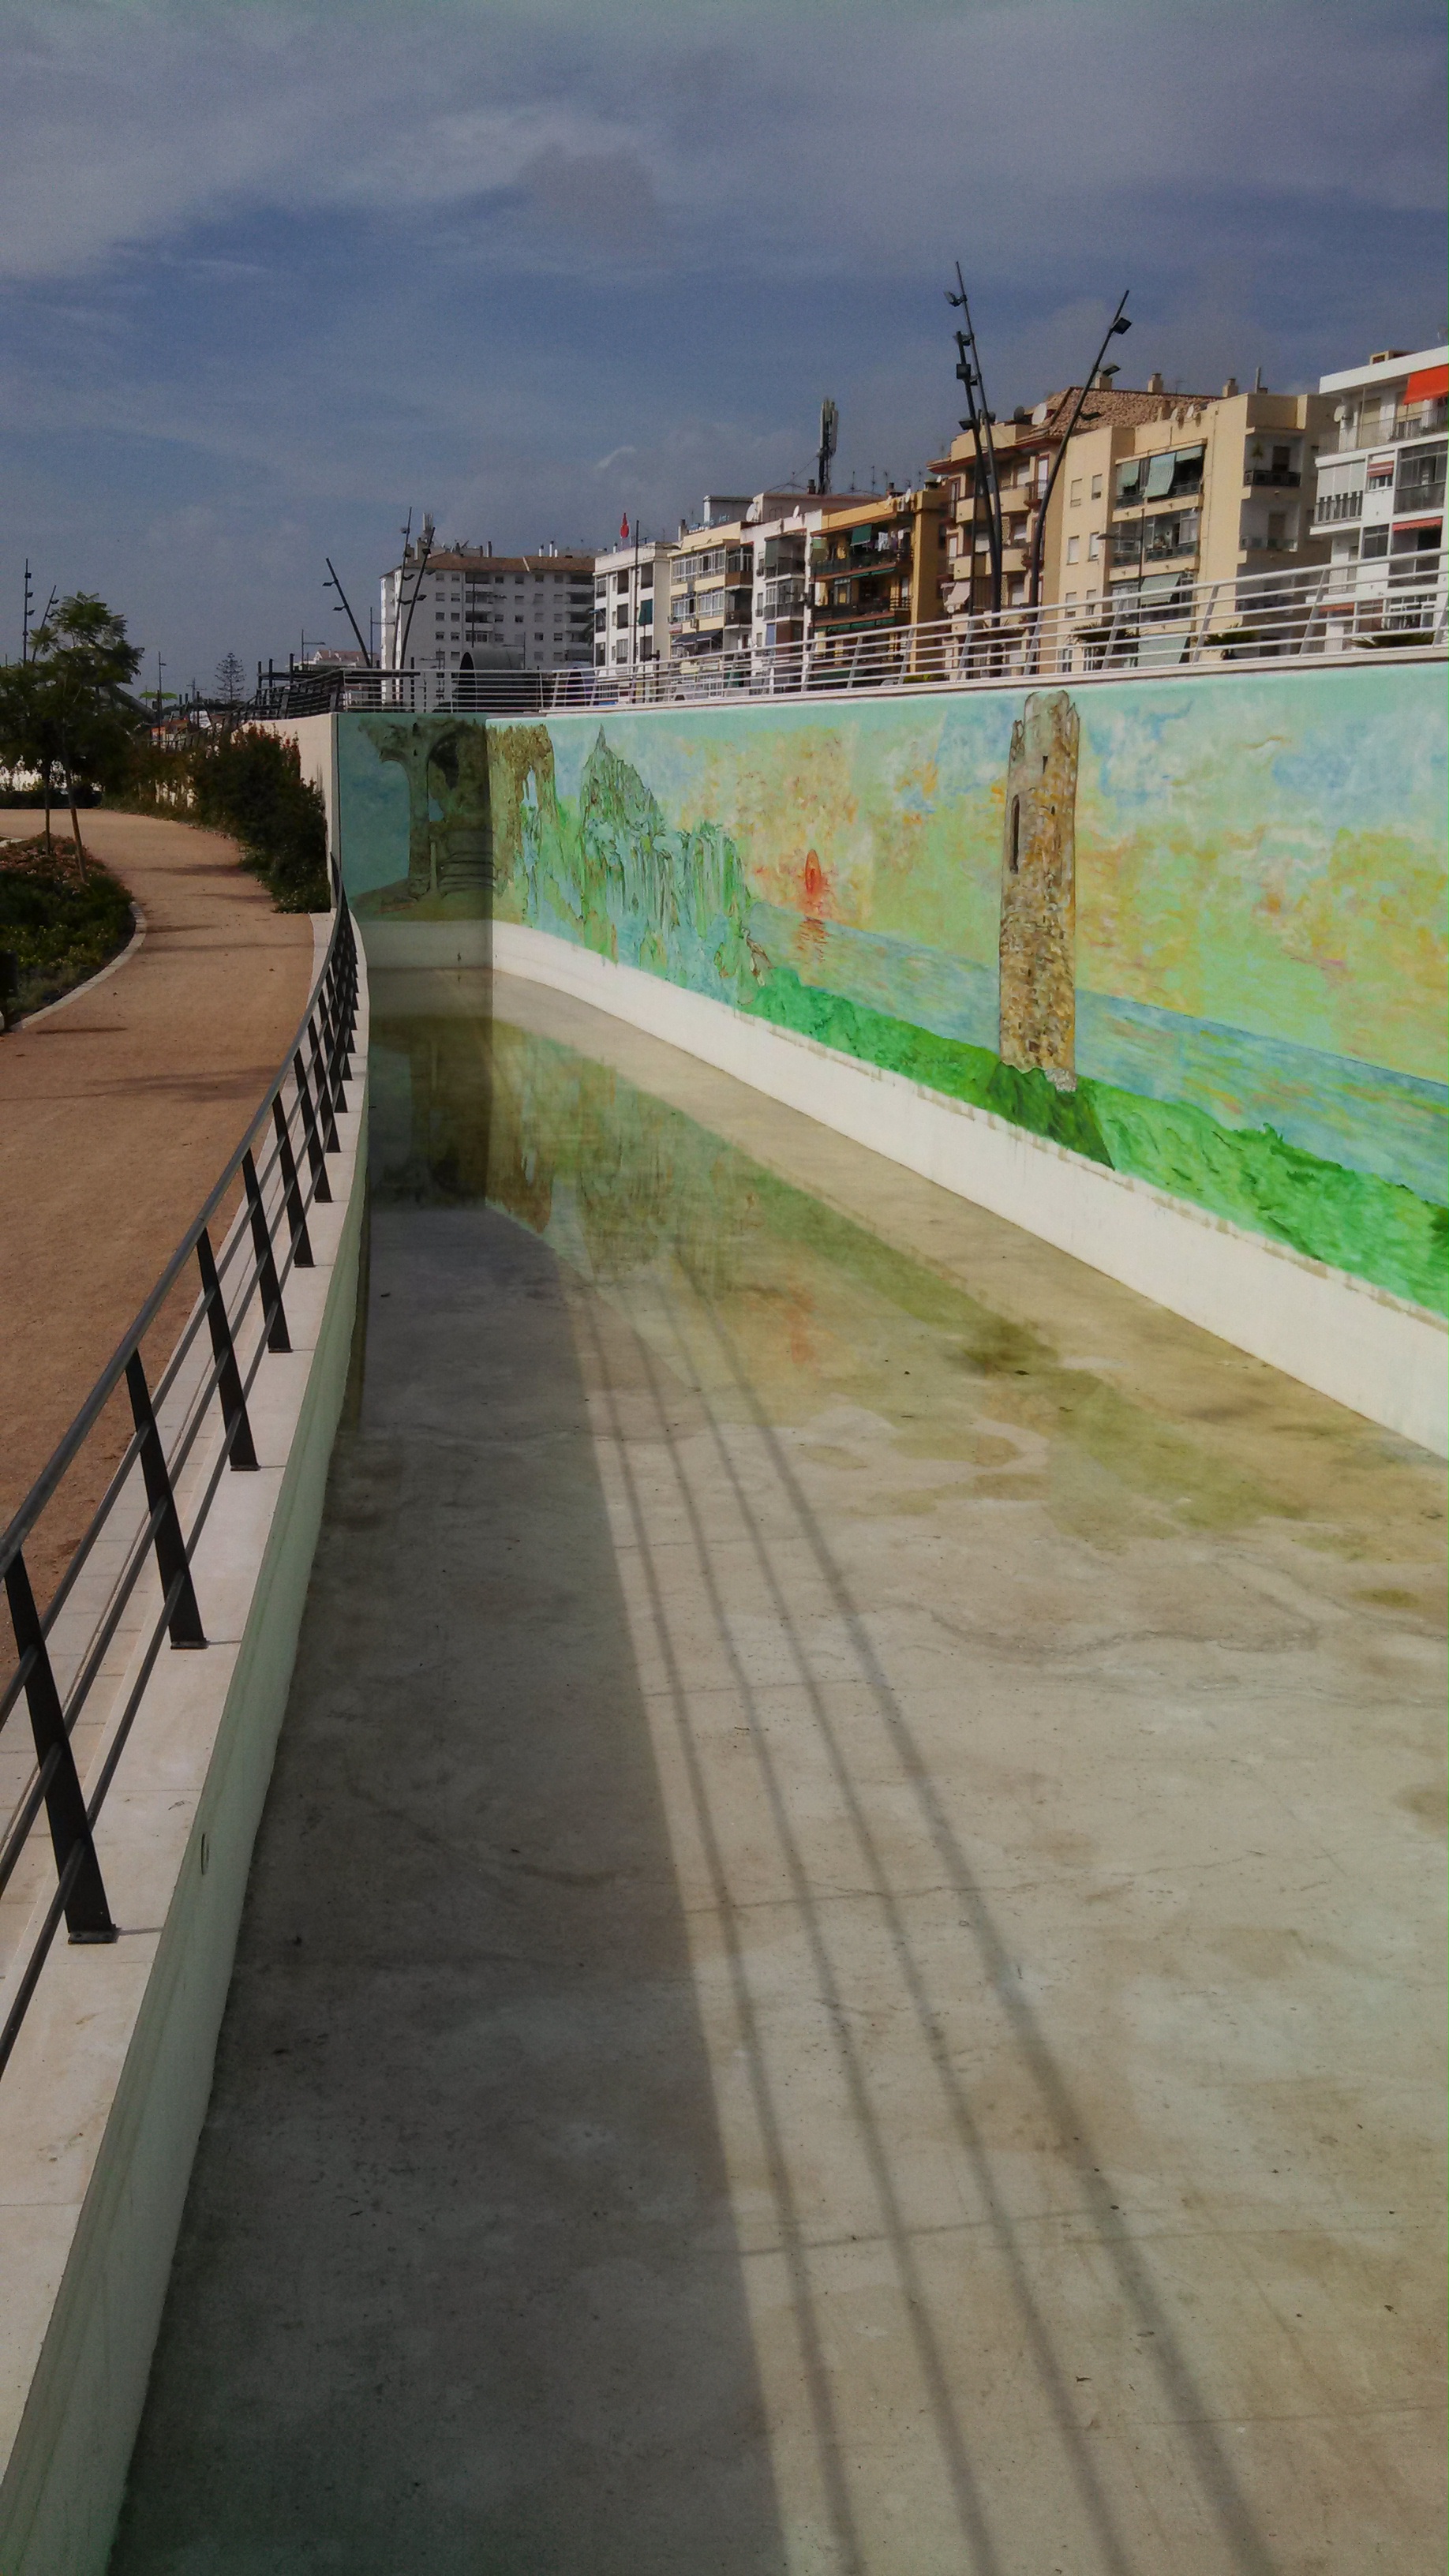 Painting to make murals in pools